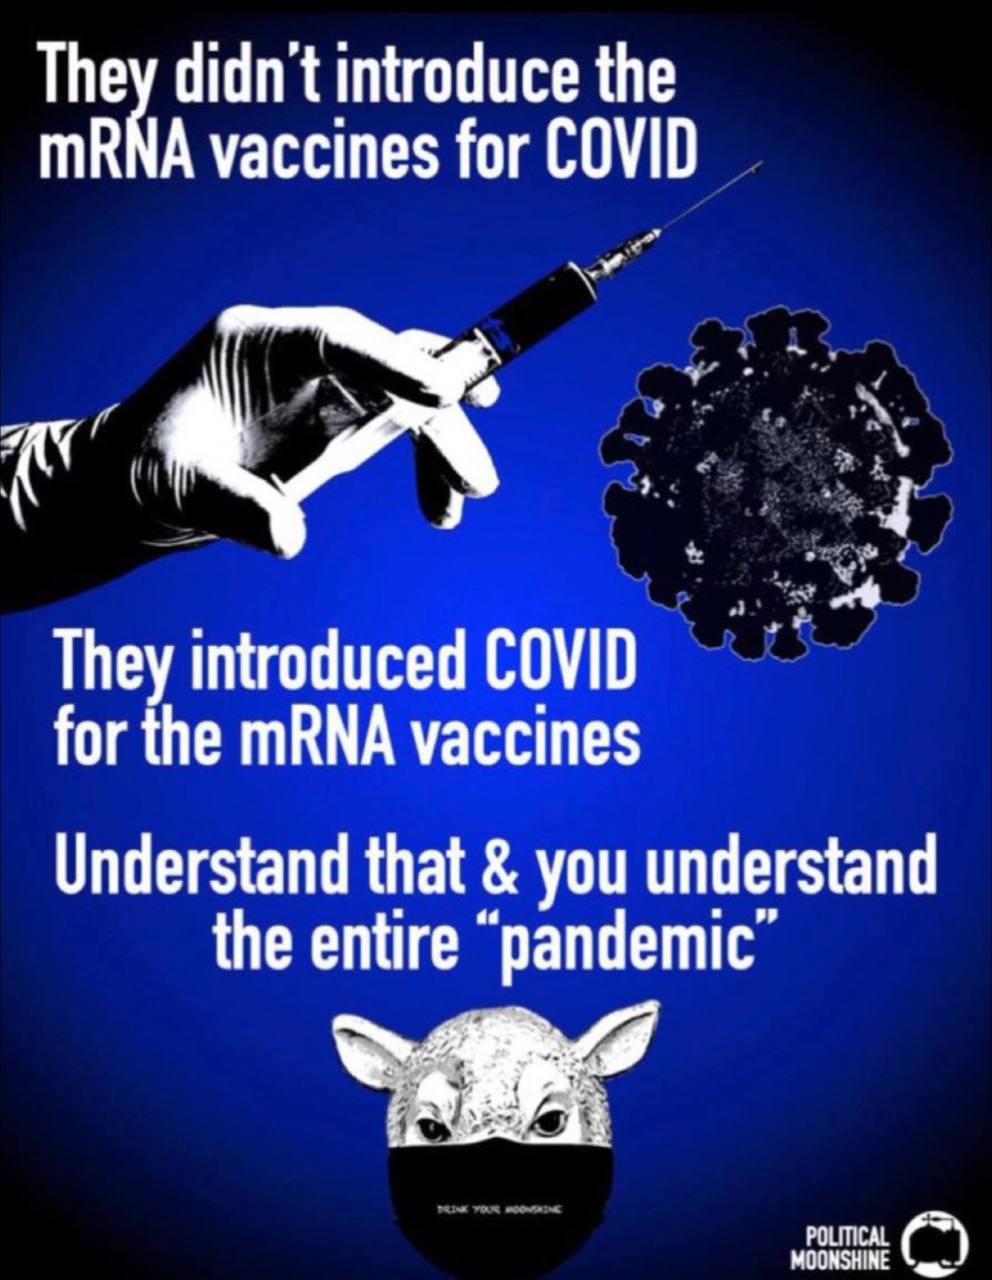 Covid made for Vaccines